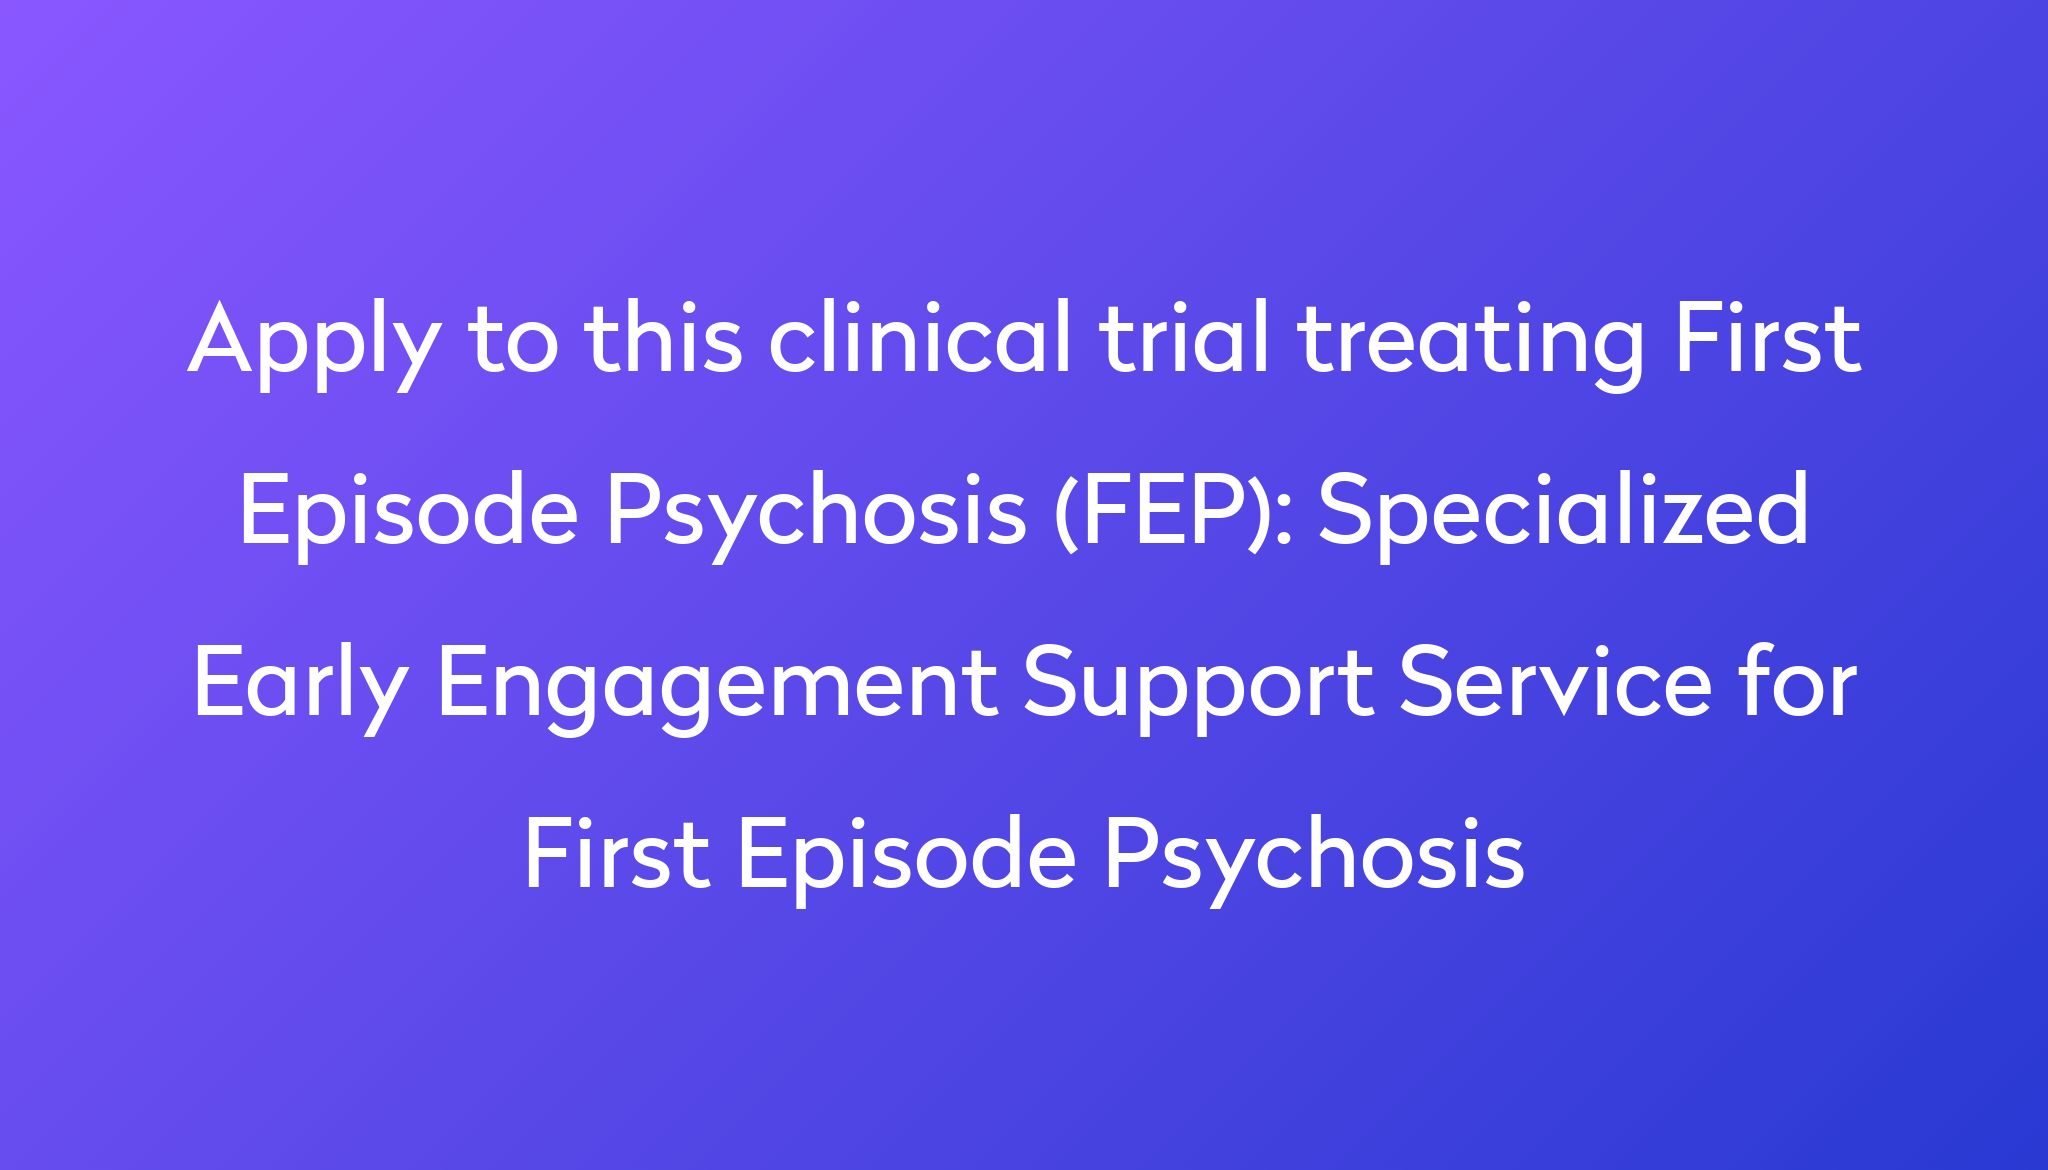 Specialized Early Engagement Support Service for First Episode